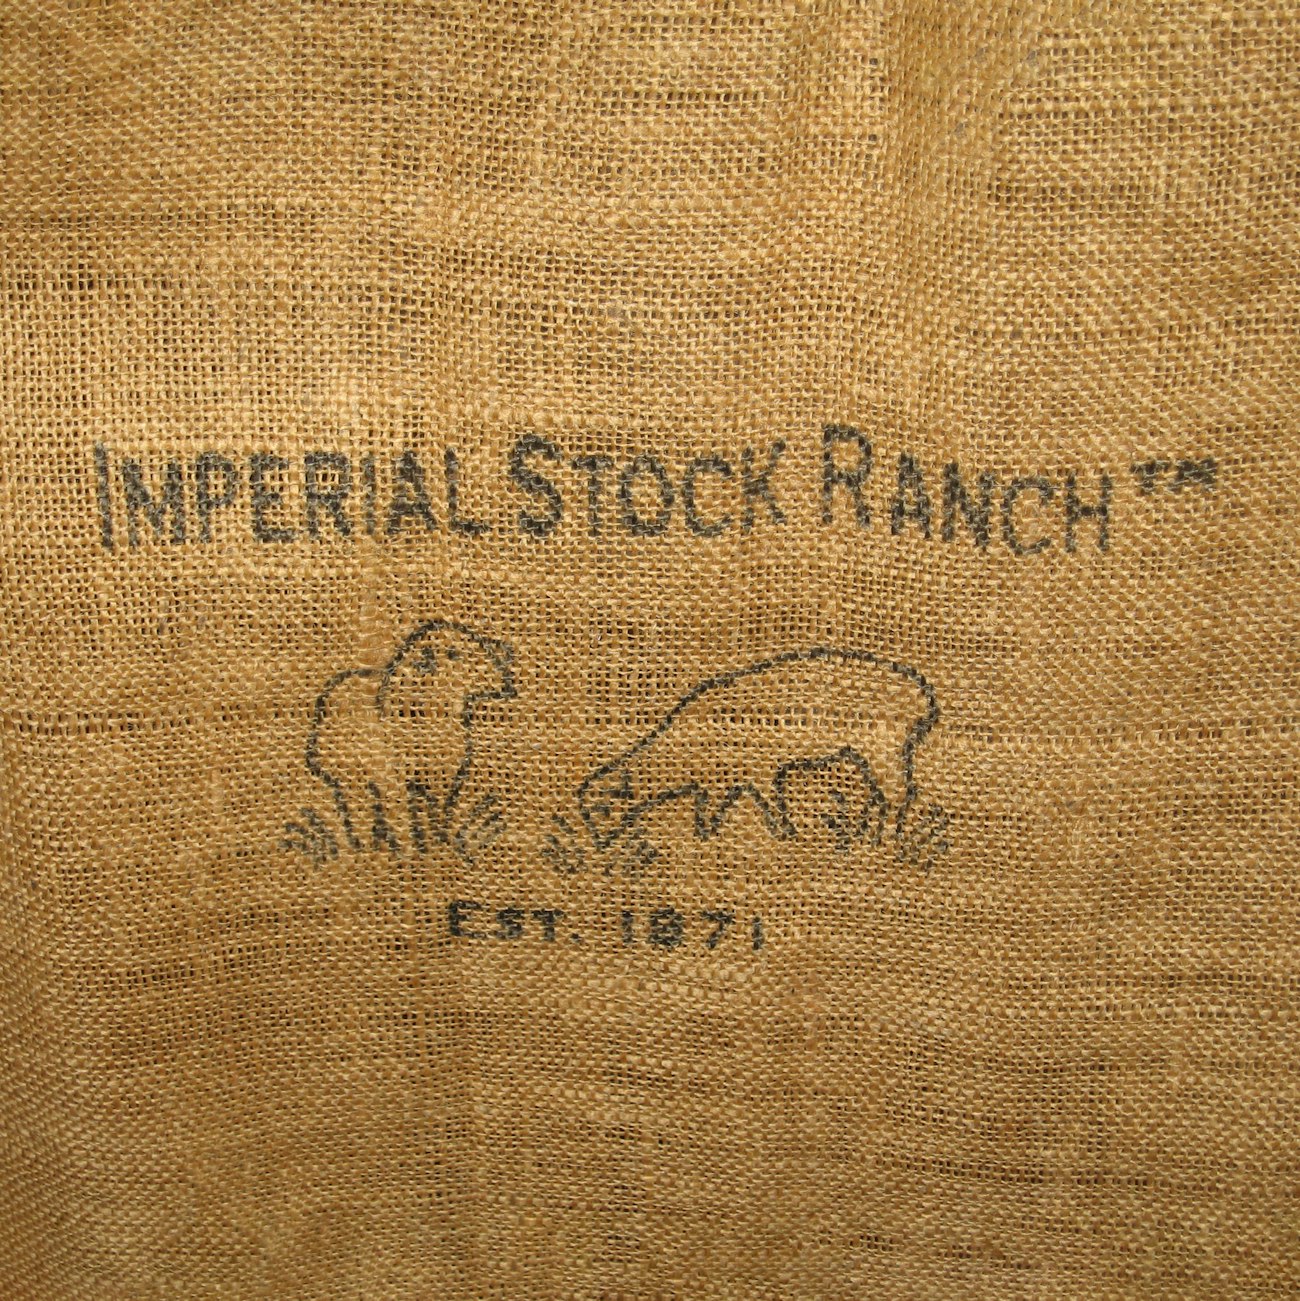 Burlap sack with "Imperial Stock Ranch Est. 1871" and two sheep printed on it